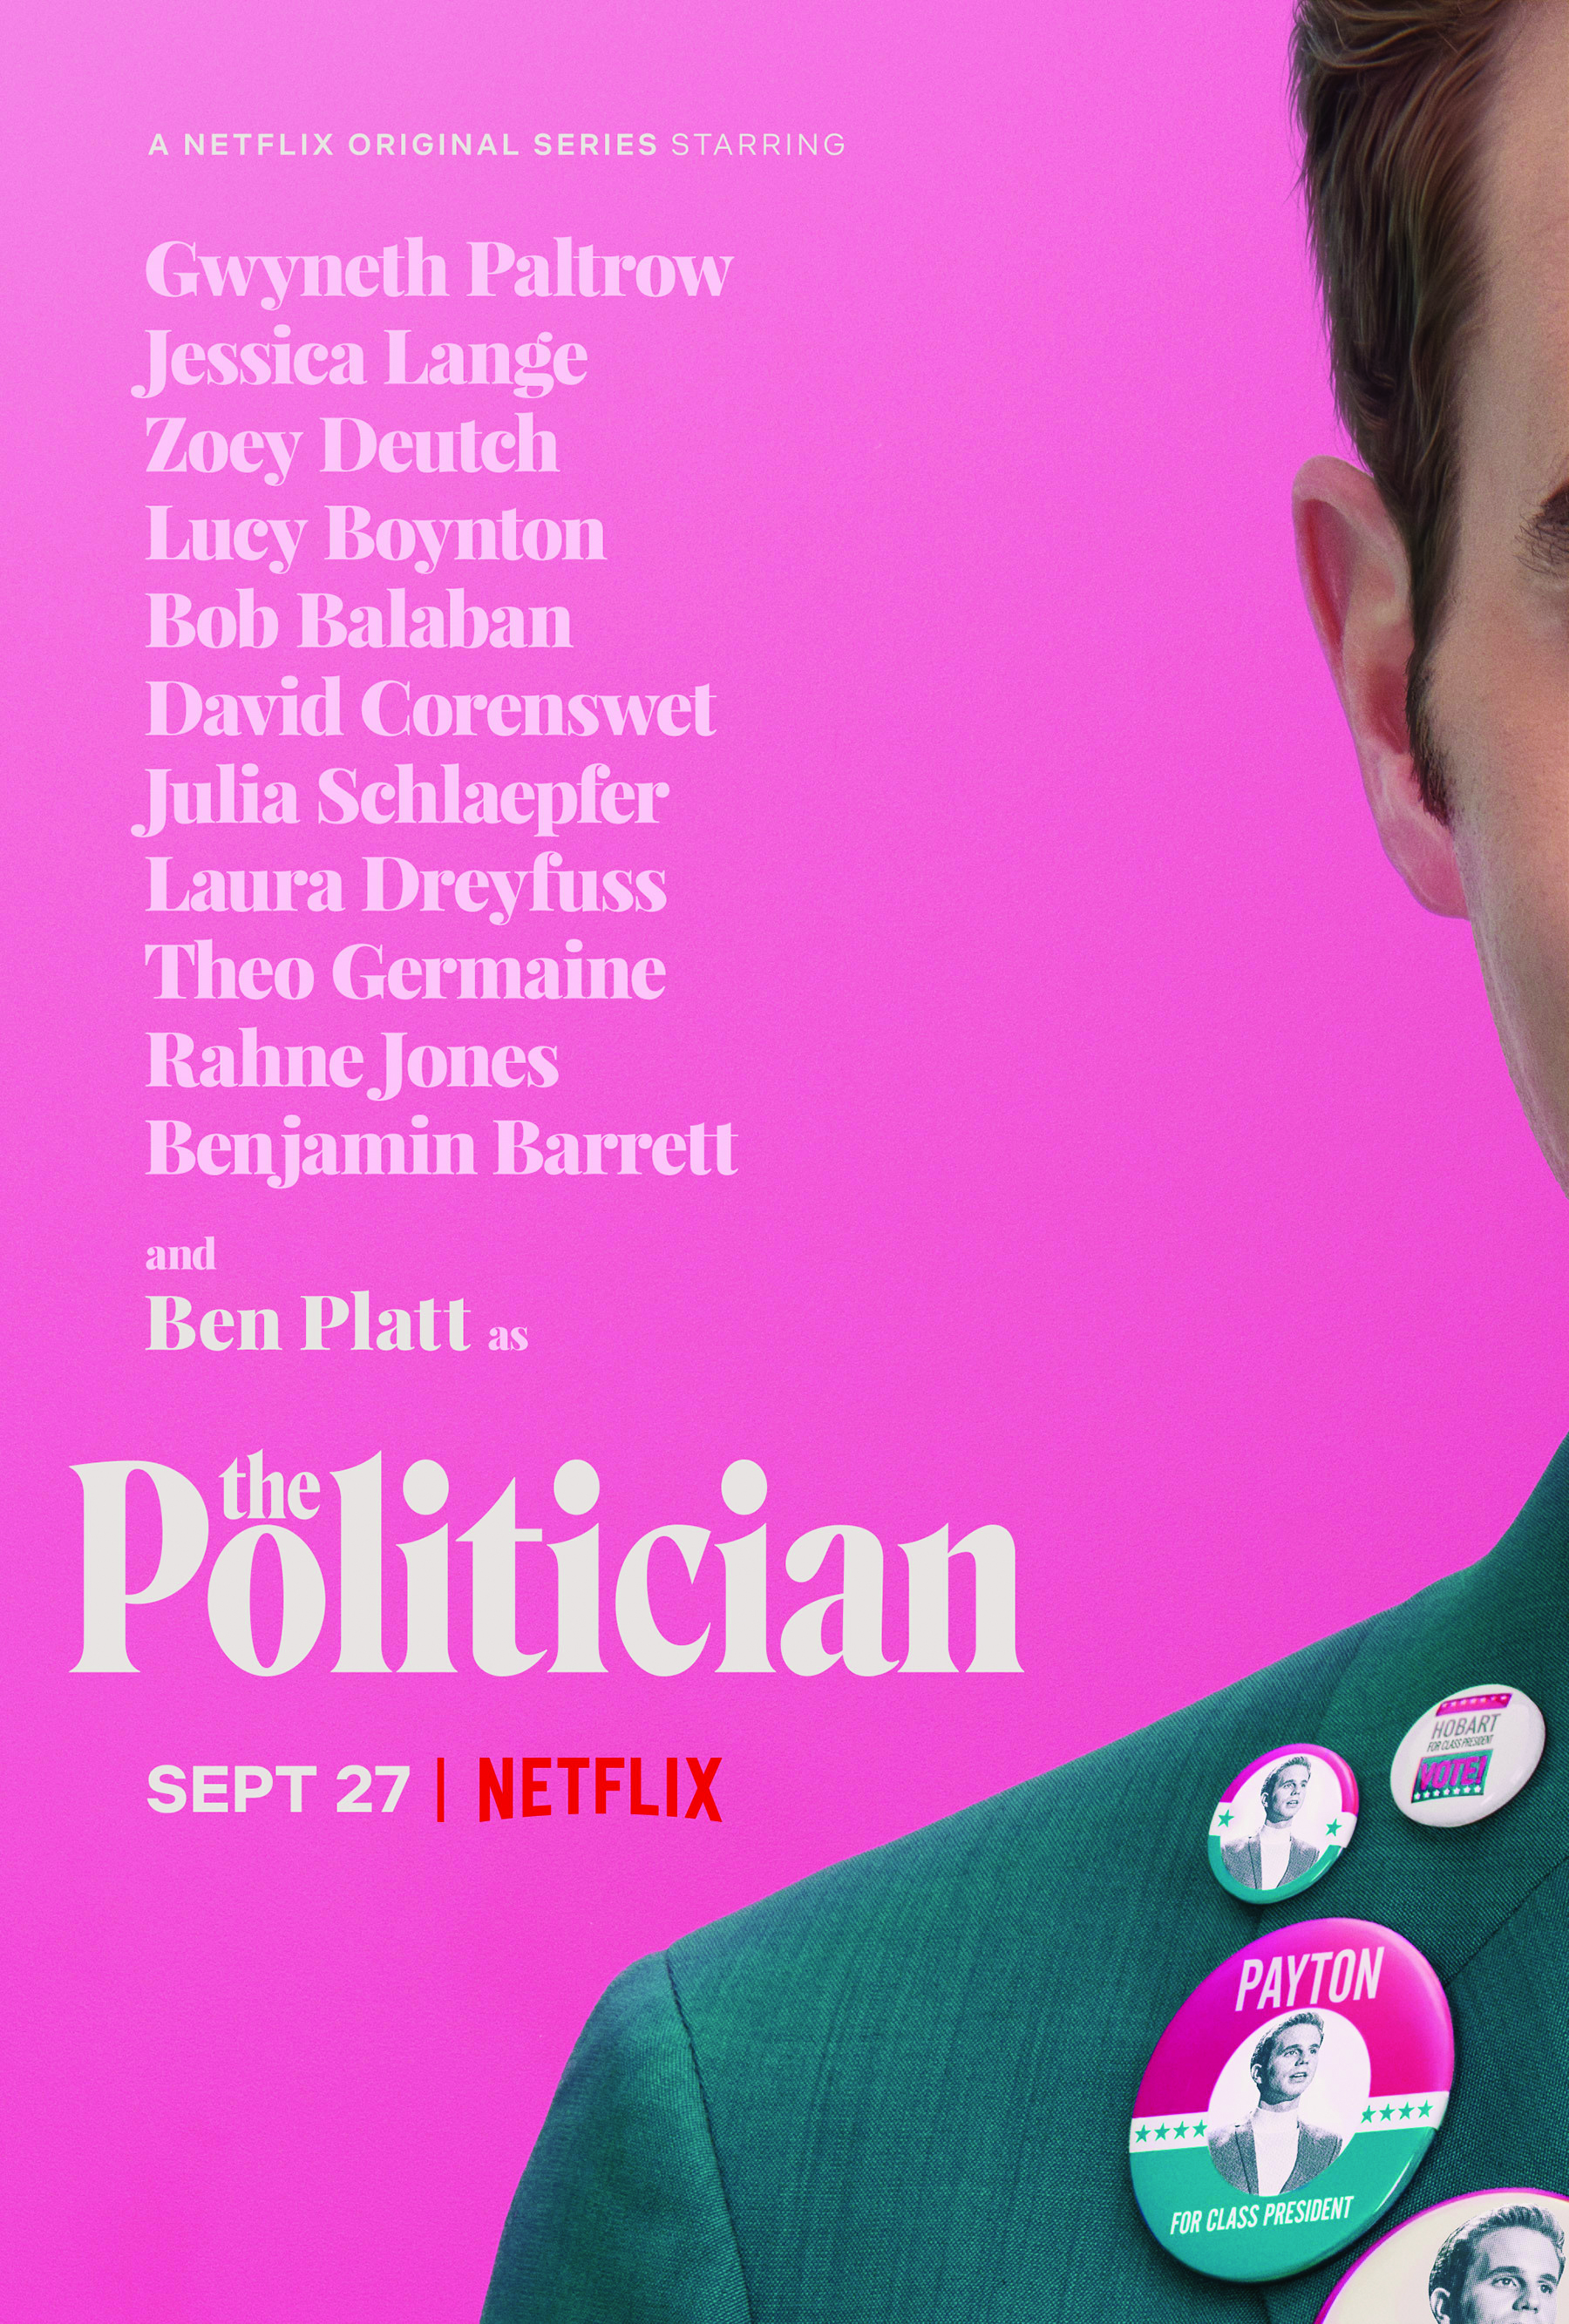 The poster for 'The Politician" on Netflix.